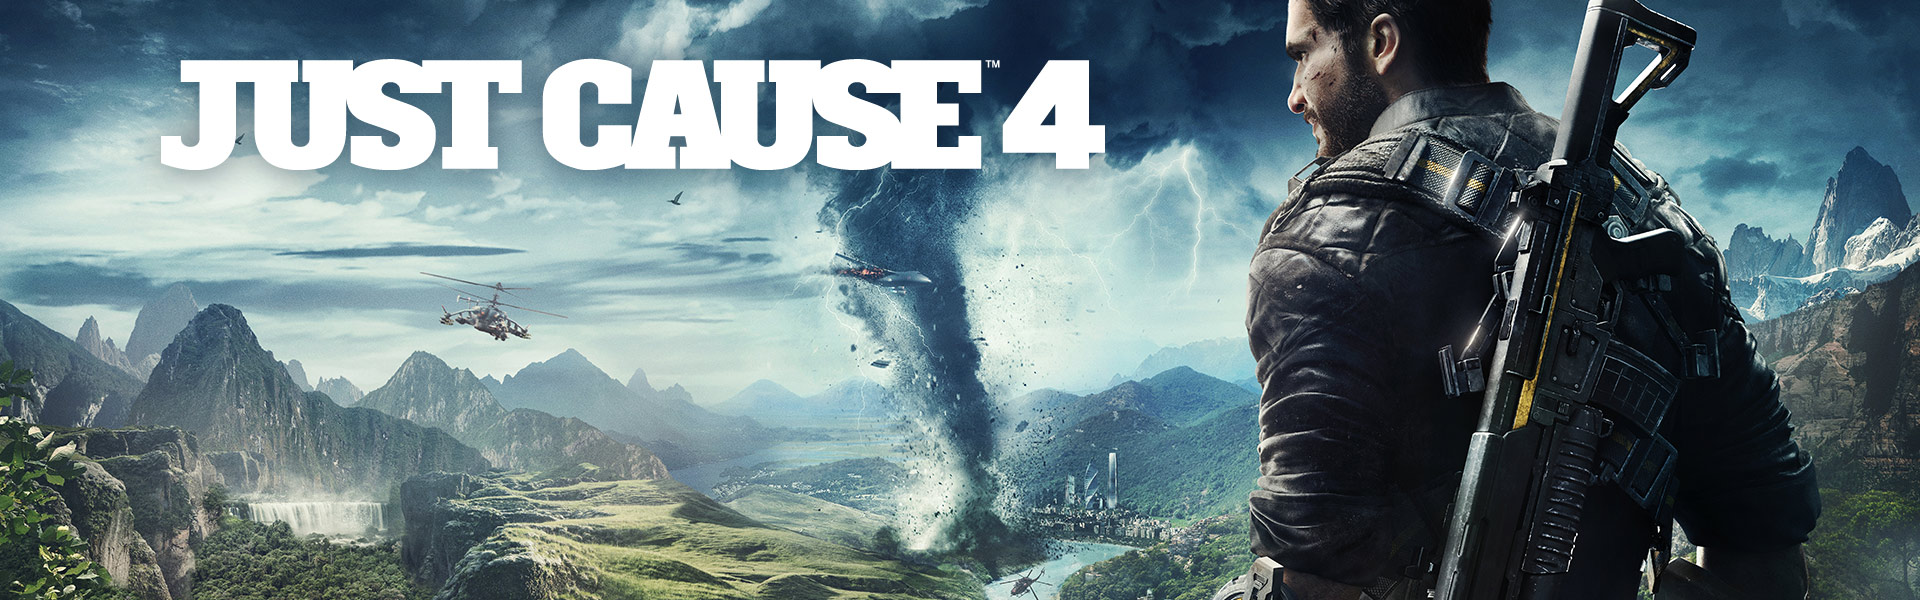 just cause 4 xbox 360